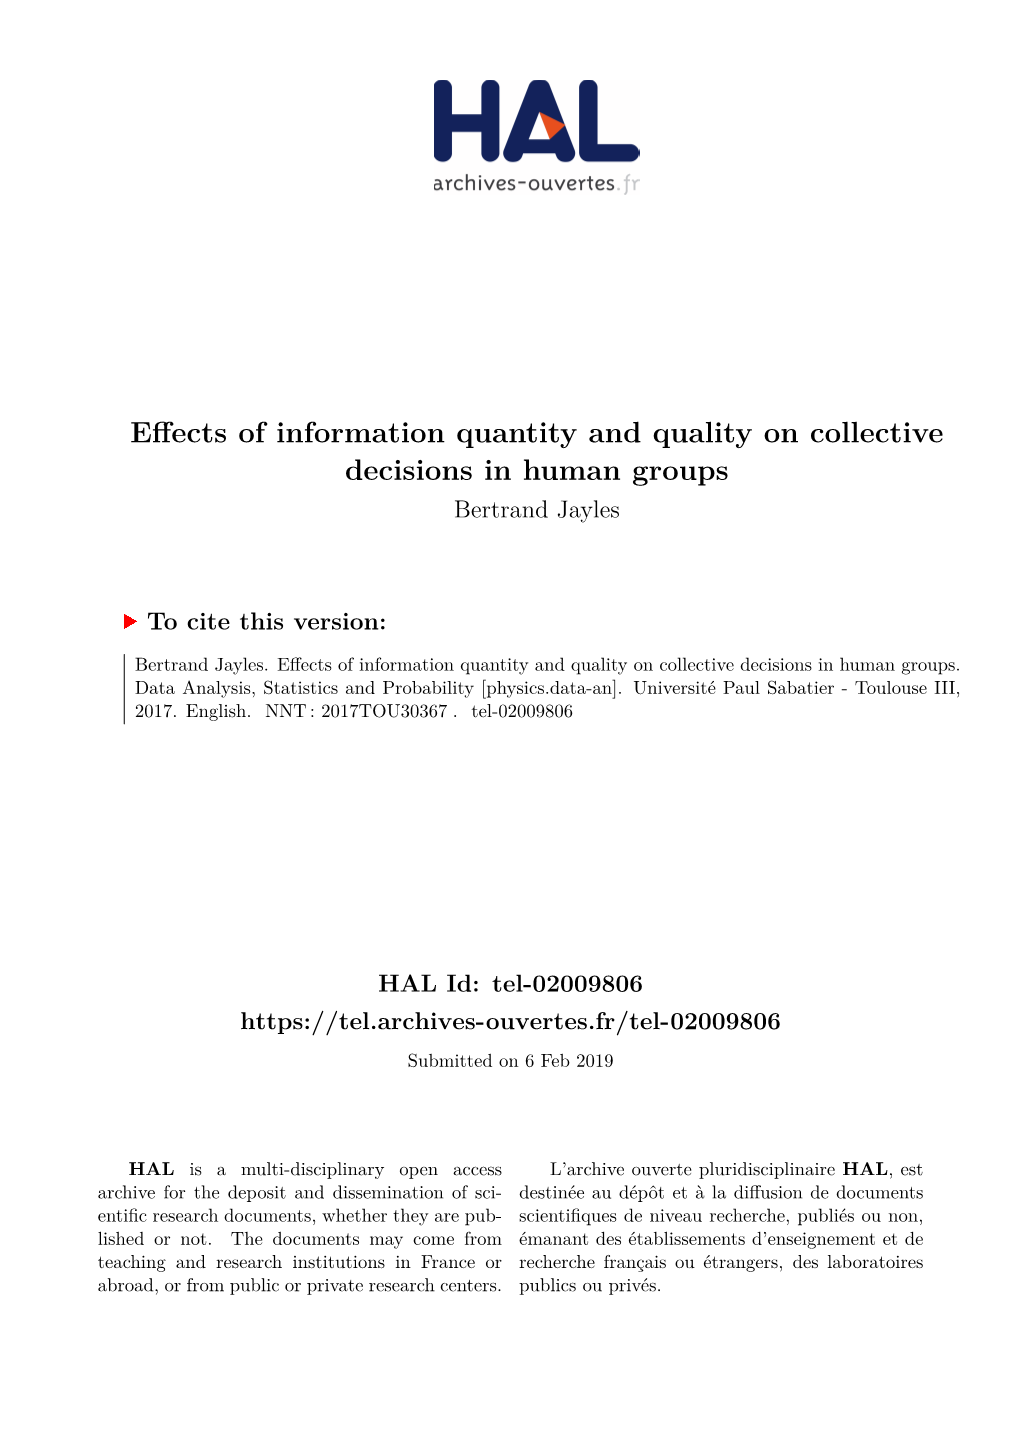 Effects of Information Quantity and Quality on Collective Decisions in Human Groups Bertrand Jayles